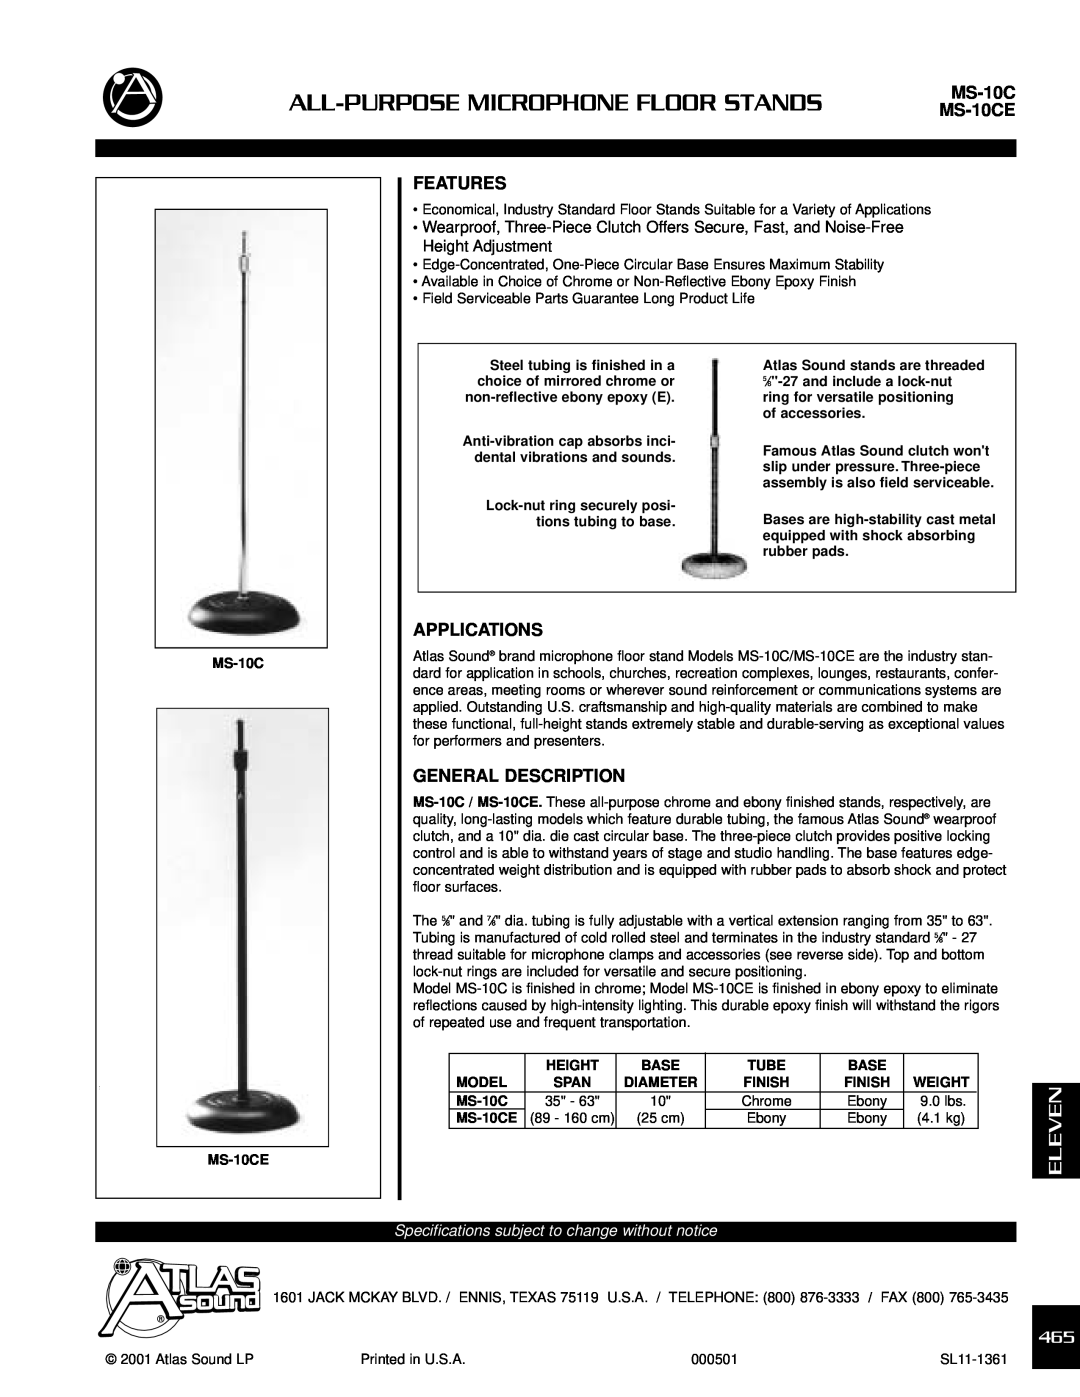 Atlas Sound MS-10CE specifications Features, Applications, General Description, All-Purposemicrophone Floor Stands 